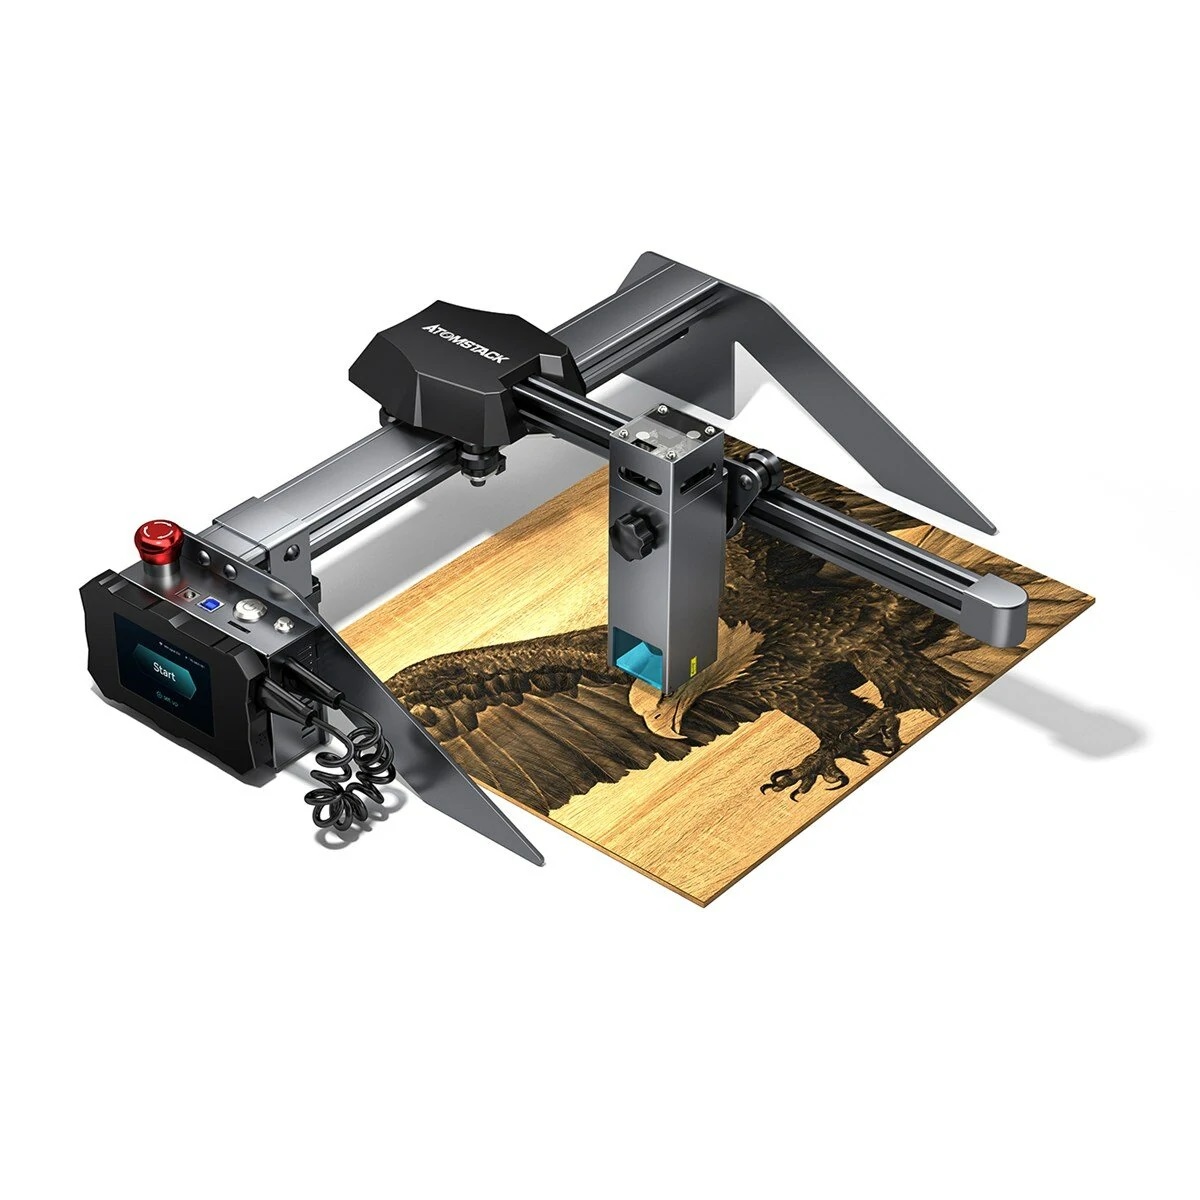 Find EU DIRECT New ATOMSTACK P9 M50 Portable Dual Laser Engraving Cutting Machine 10W Output Power DIY Laser Engraver Cutter 304 Mirror Stainless Steel Engraving Support Offline Engraving 20mm Wood Cutting 15mm Acrylic Cutting for Sale on Gipsybee.com with cryptocurrencies